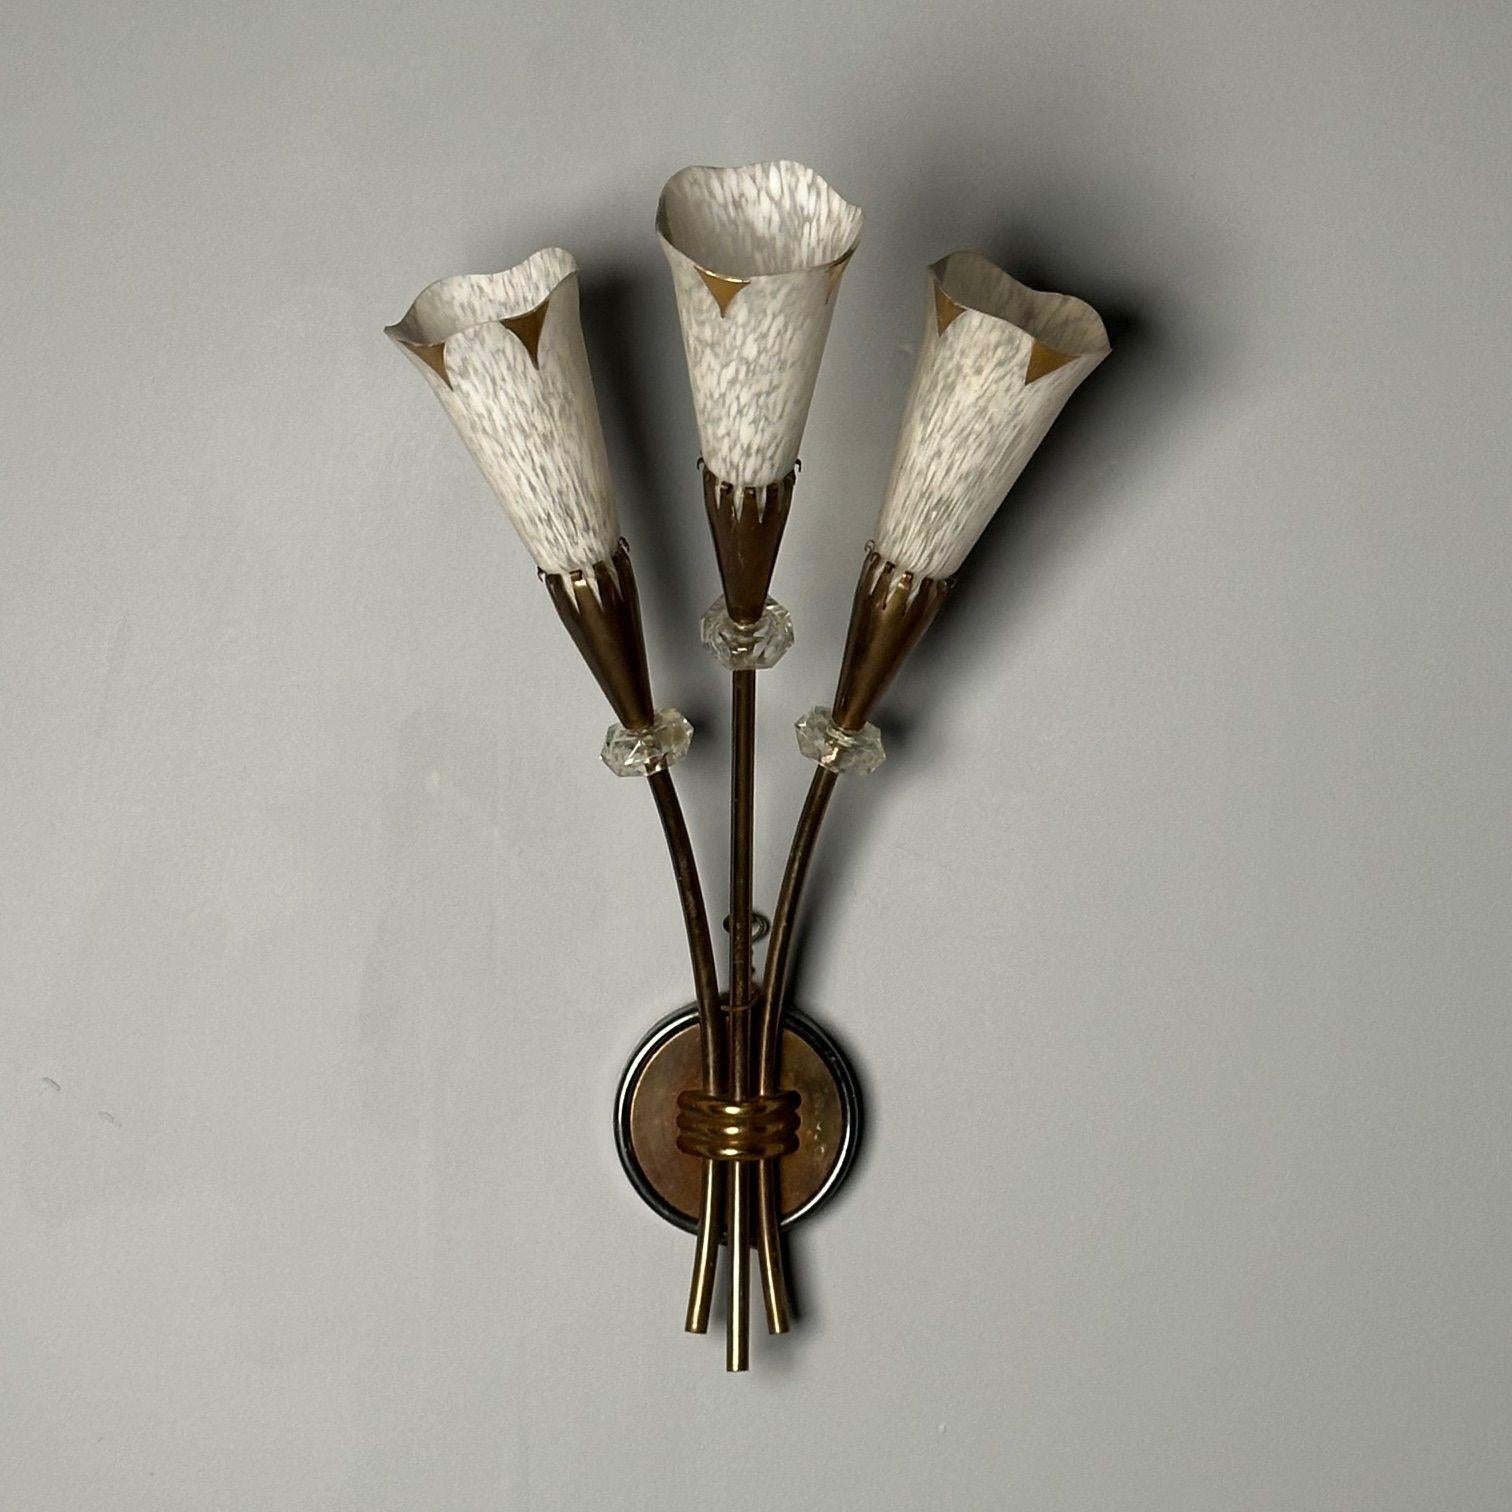 French Mid-Century Modern, Three Arm Sconces, Brass, Crystal, France, 1950s For Sale 4